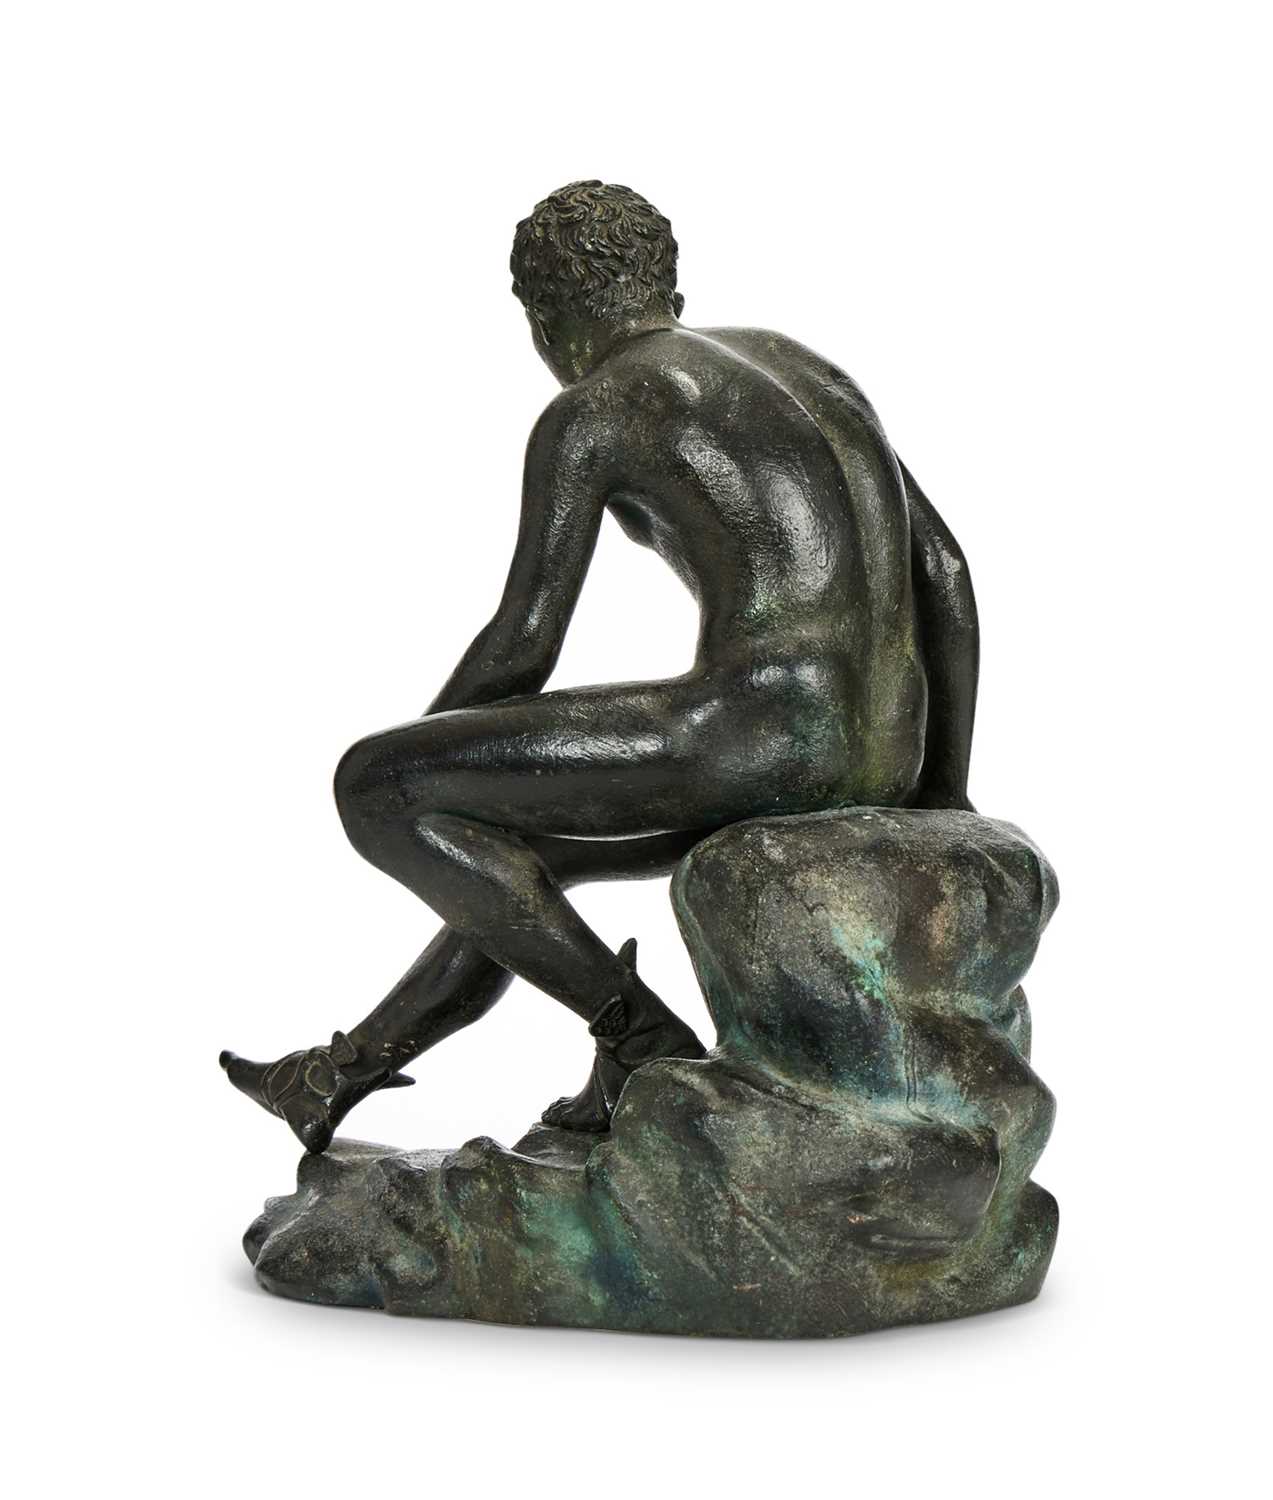 GIORGIO SOMMER, NAPOLI: A 19TH CENTURY BRONZE FIGURE OF THE SEATED MERCURY - Image 2 of 3